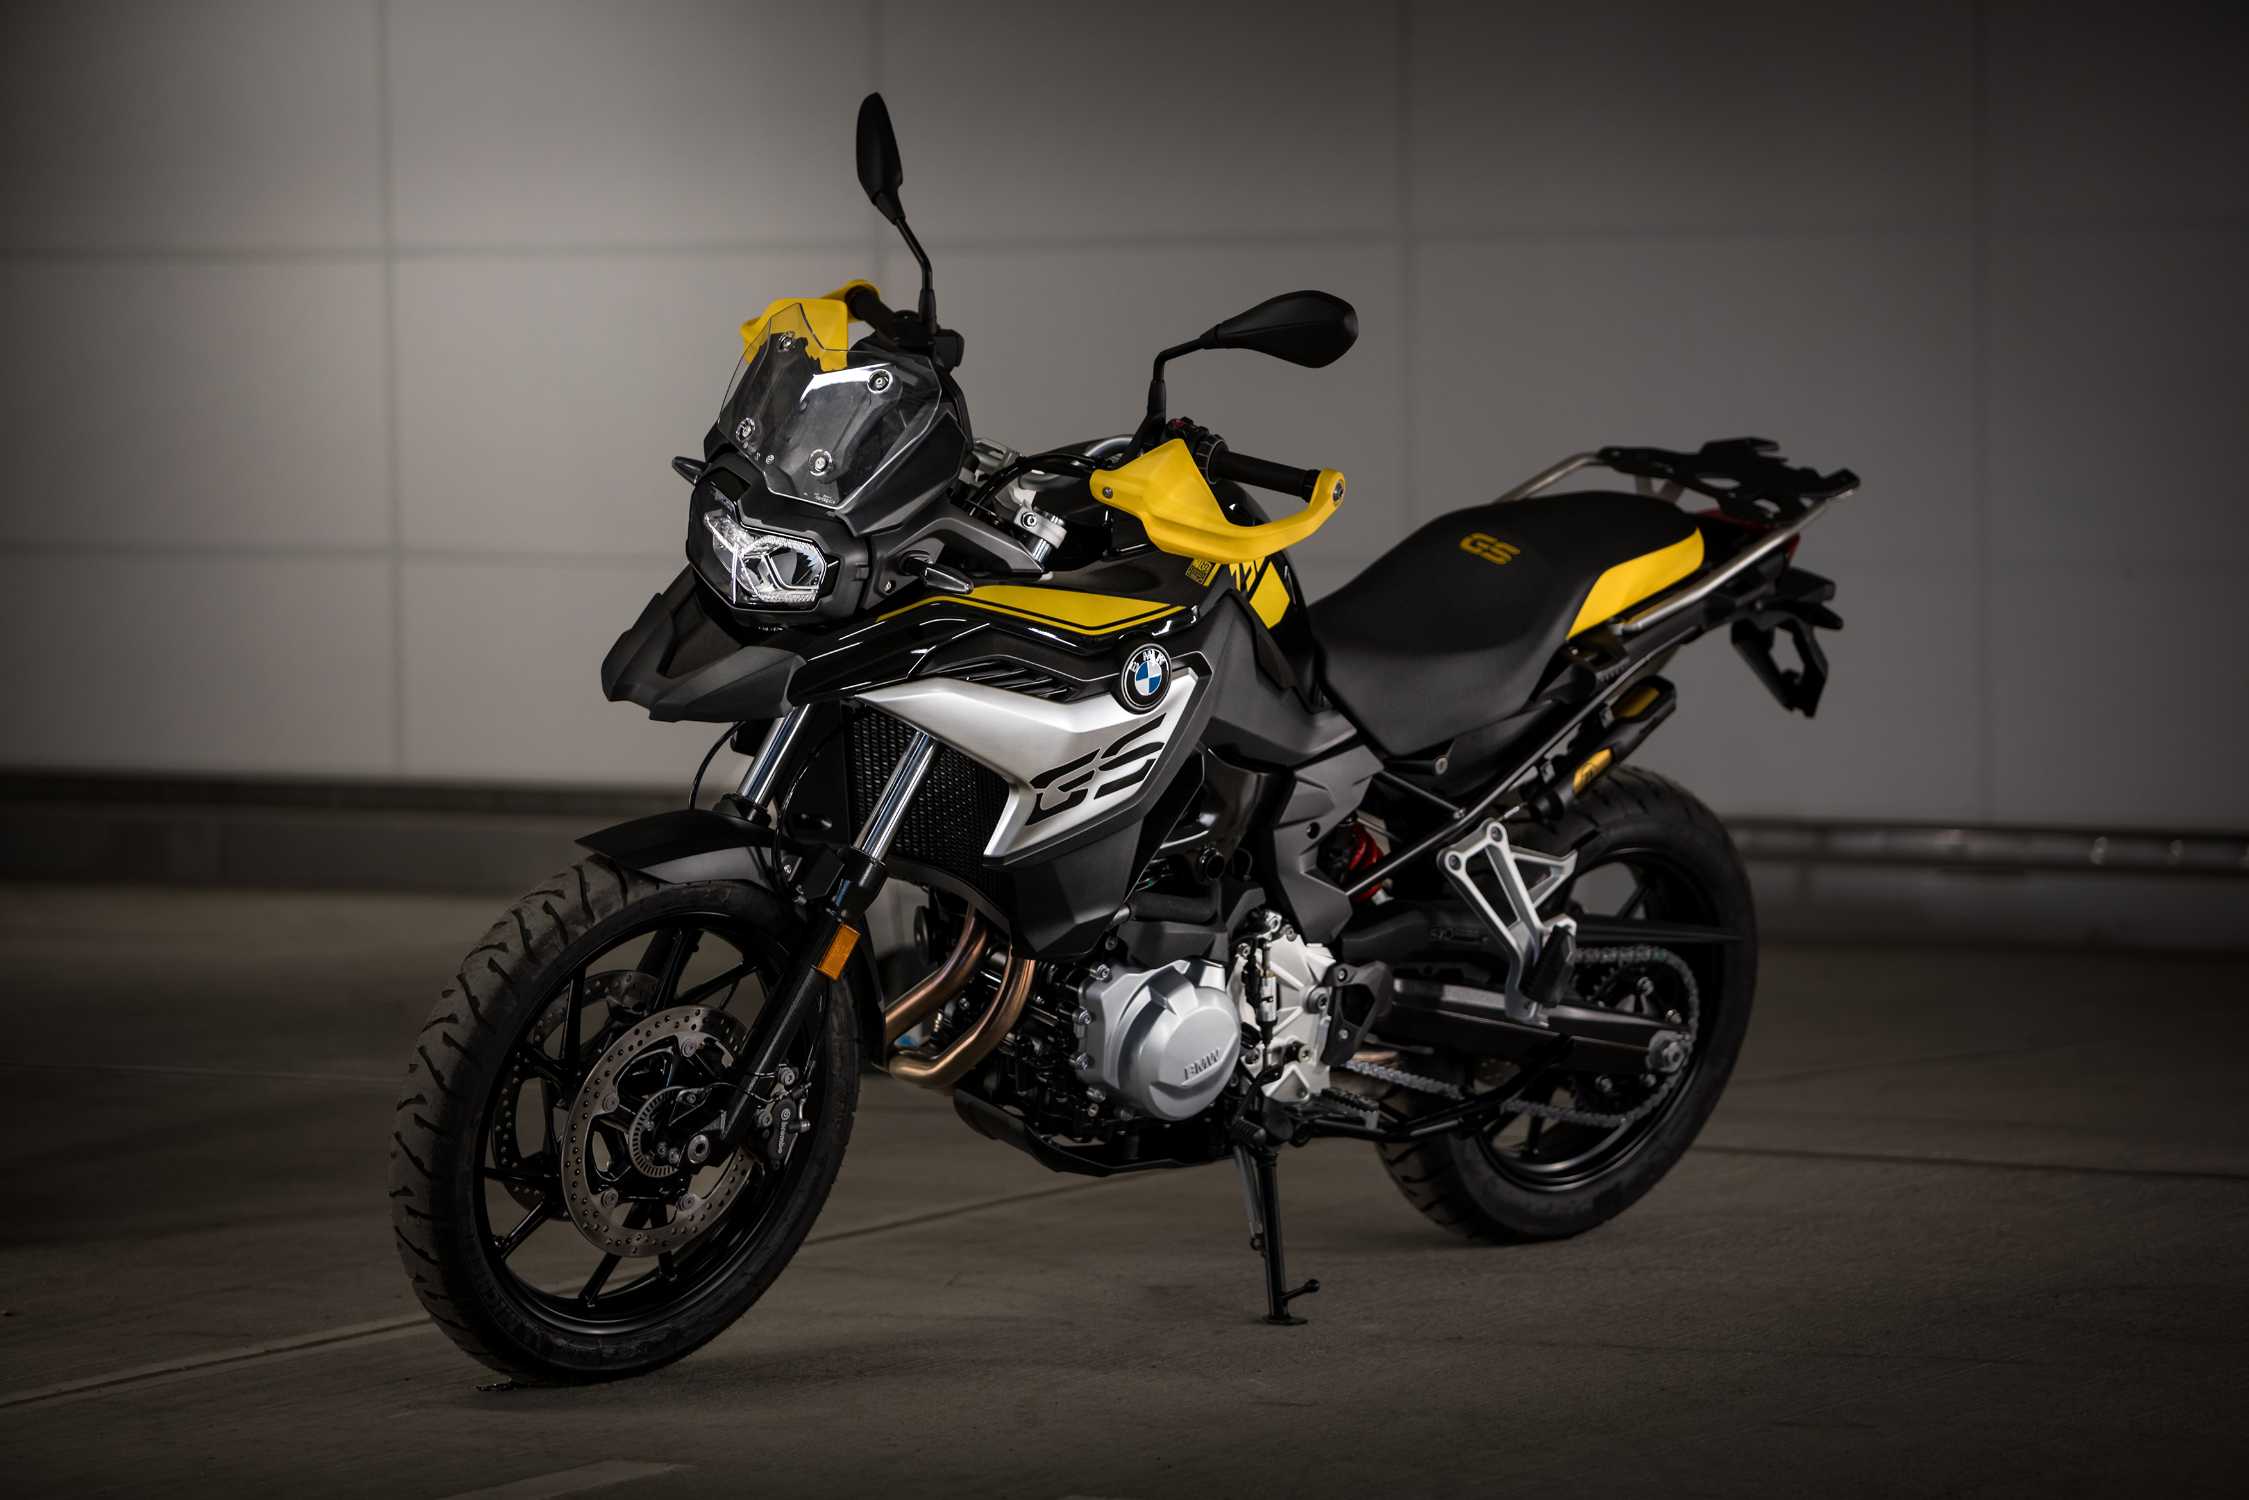 GSシリーズ40周年記念モデル「新型BMW F 750 GS / F 850 GS 40 Years GS Edition」誕生